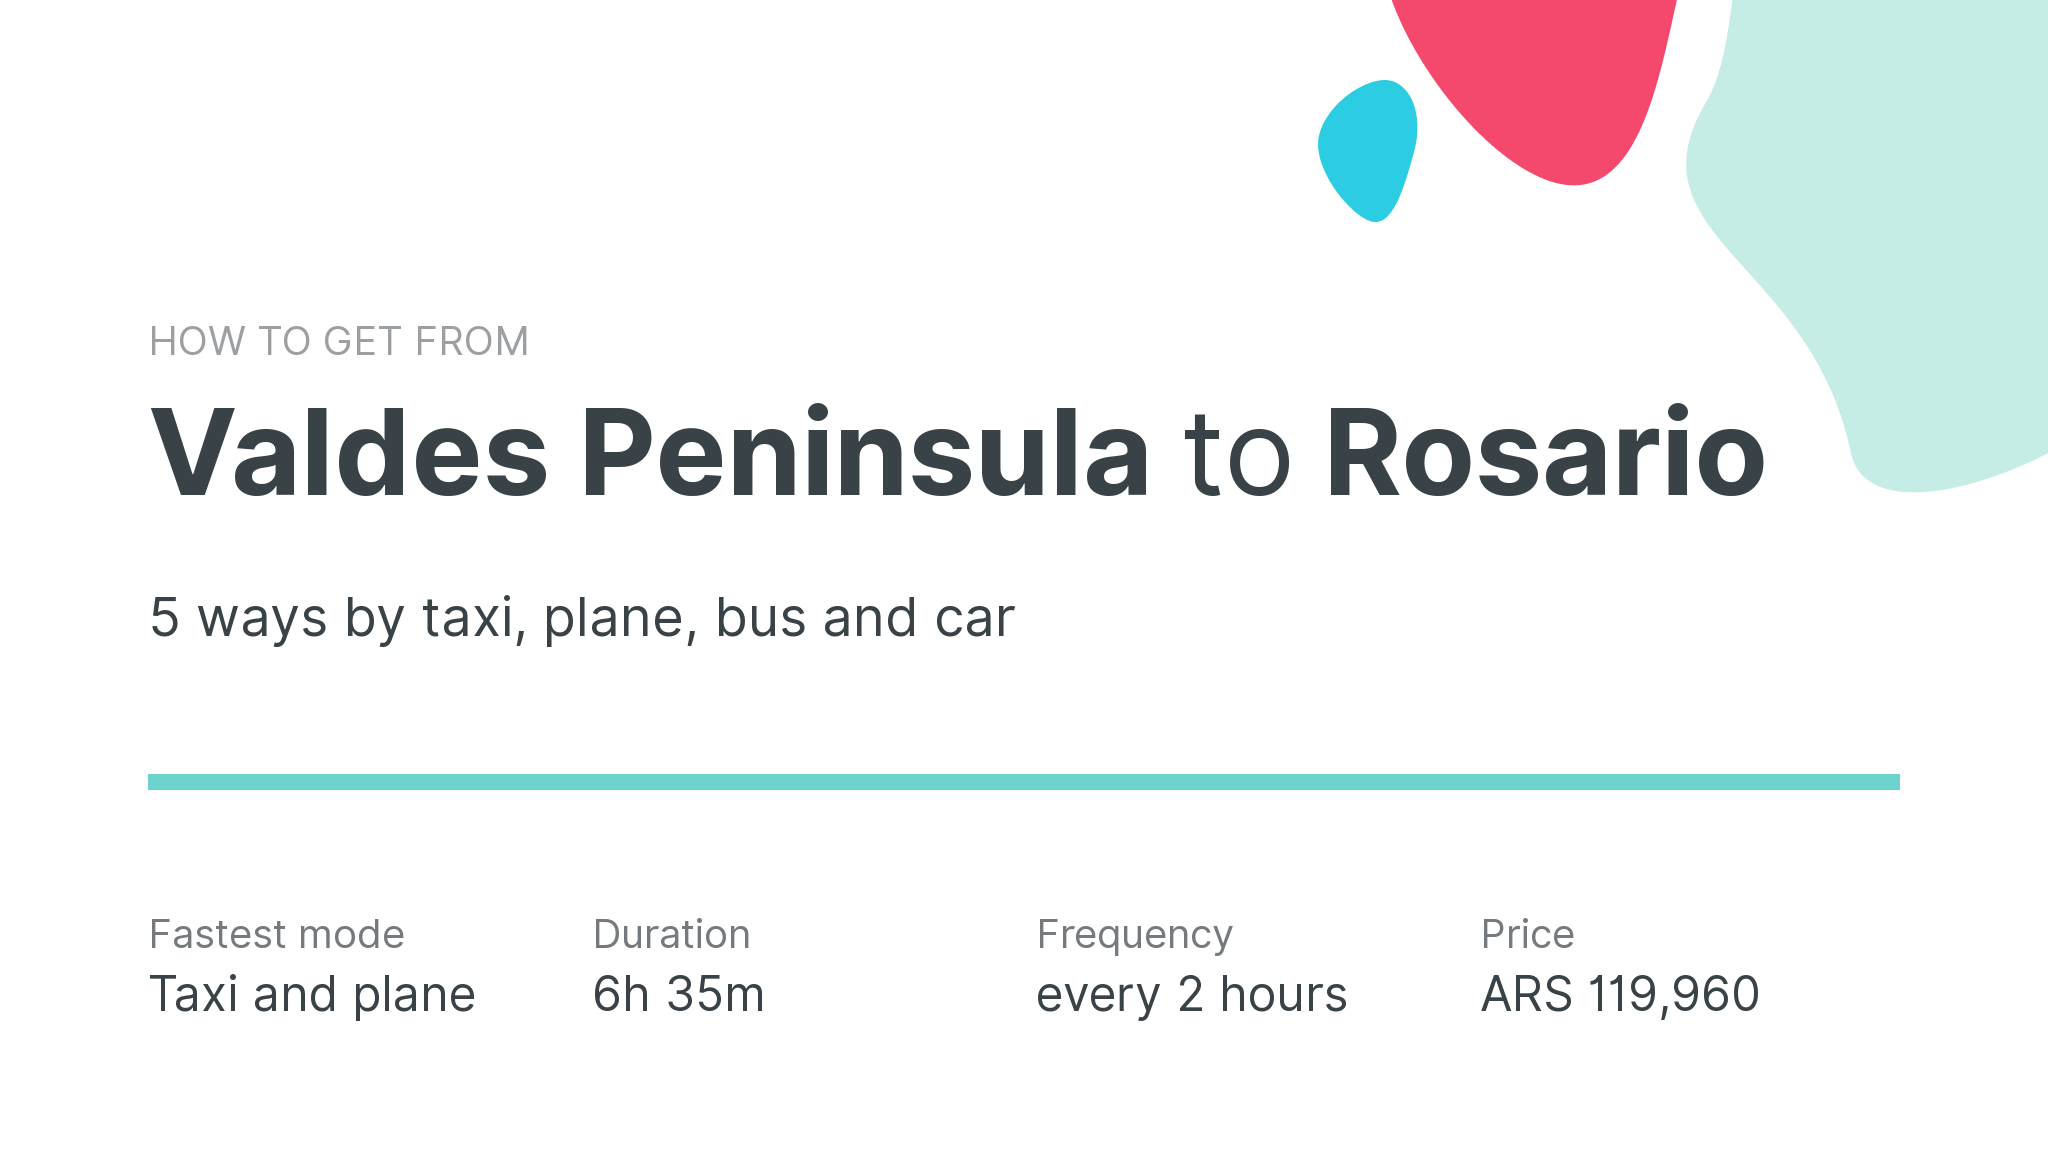 How do I get from Valdes Peninsula to Rosario